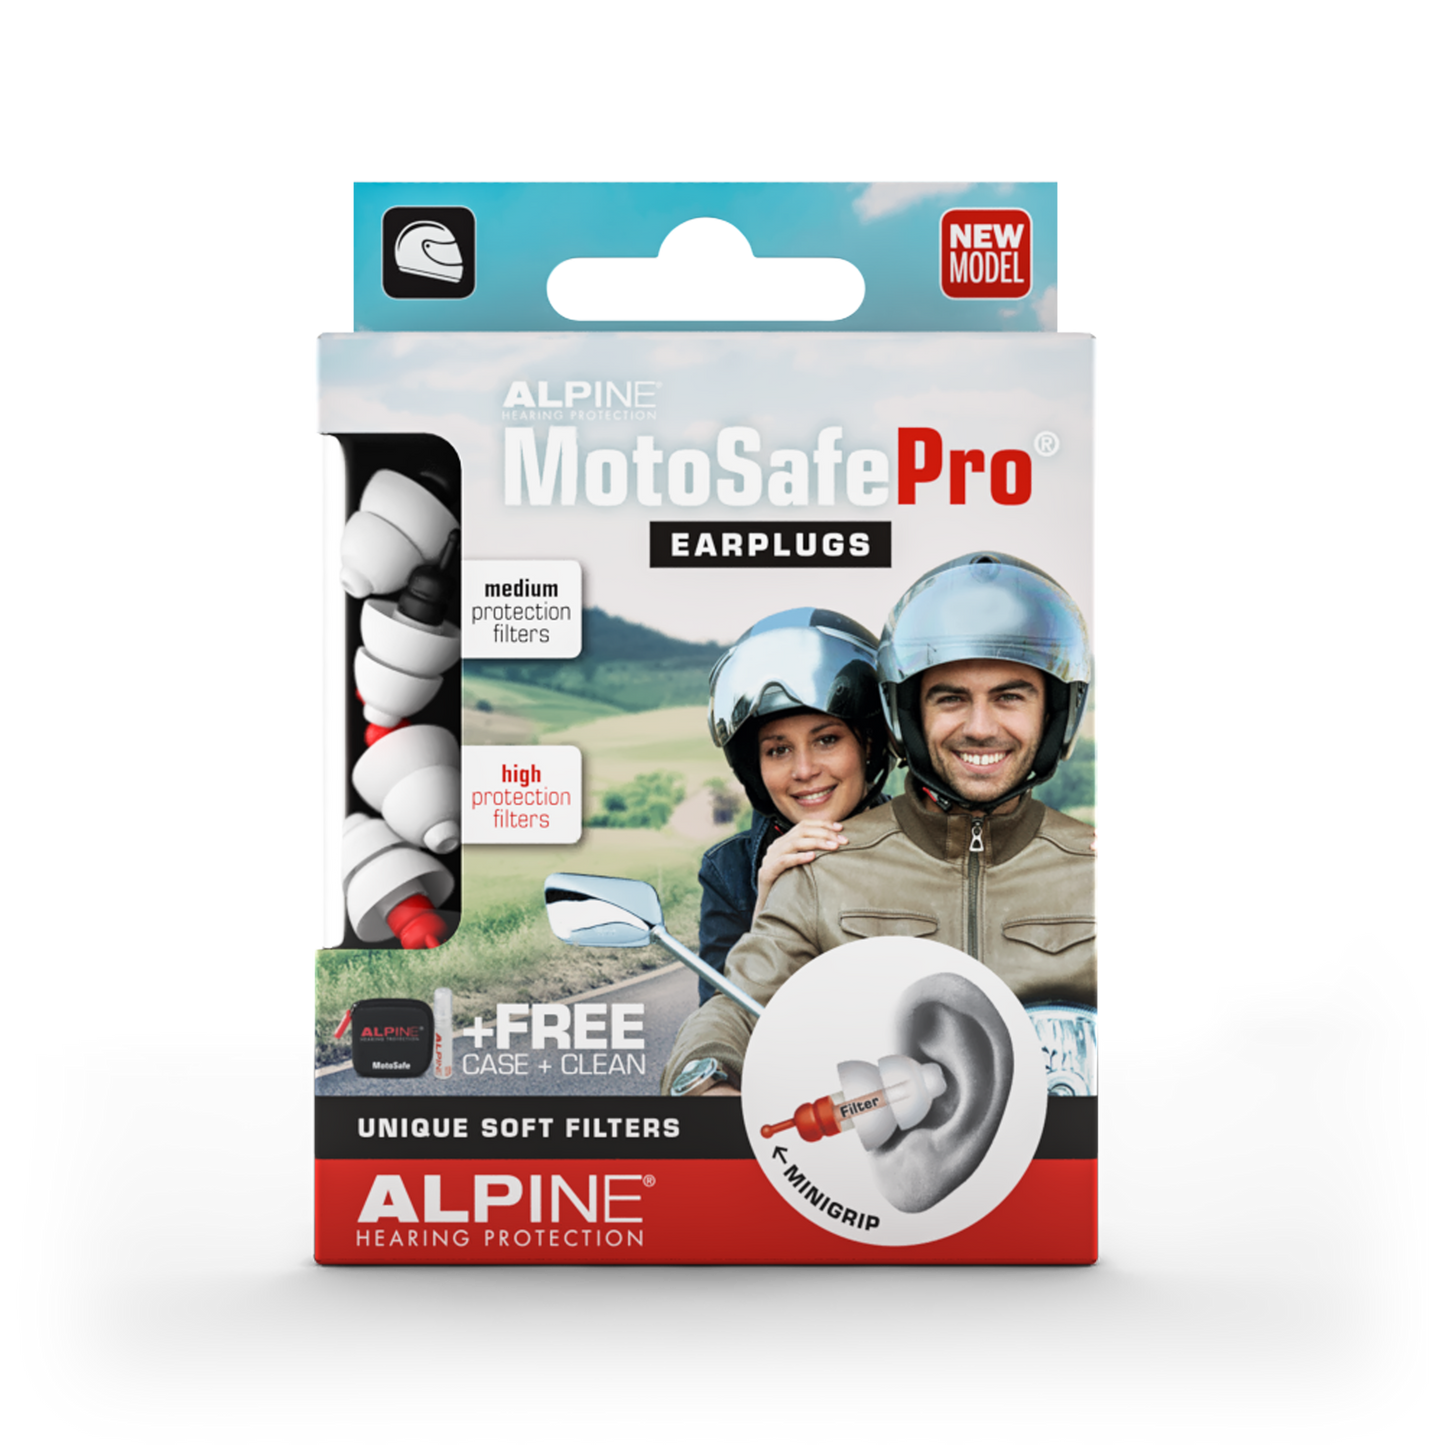 Alpine MotoSafe Pro earplugs for motorcyclicts Alpine hearing protection Earplugs earmuffs protect your ear red dot award Cleaning Spray Cord for earplugs Deluxe Pouch Ear Spray Miniboxx Sleeping Mask Travel pouch Travelbox Deluxe cleaning 